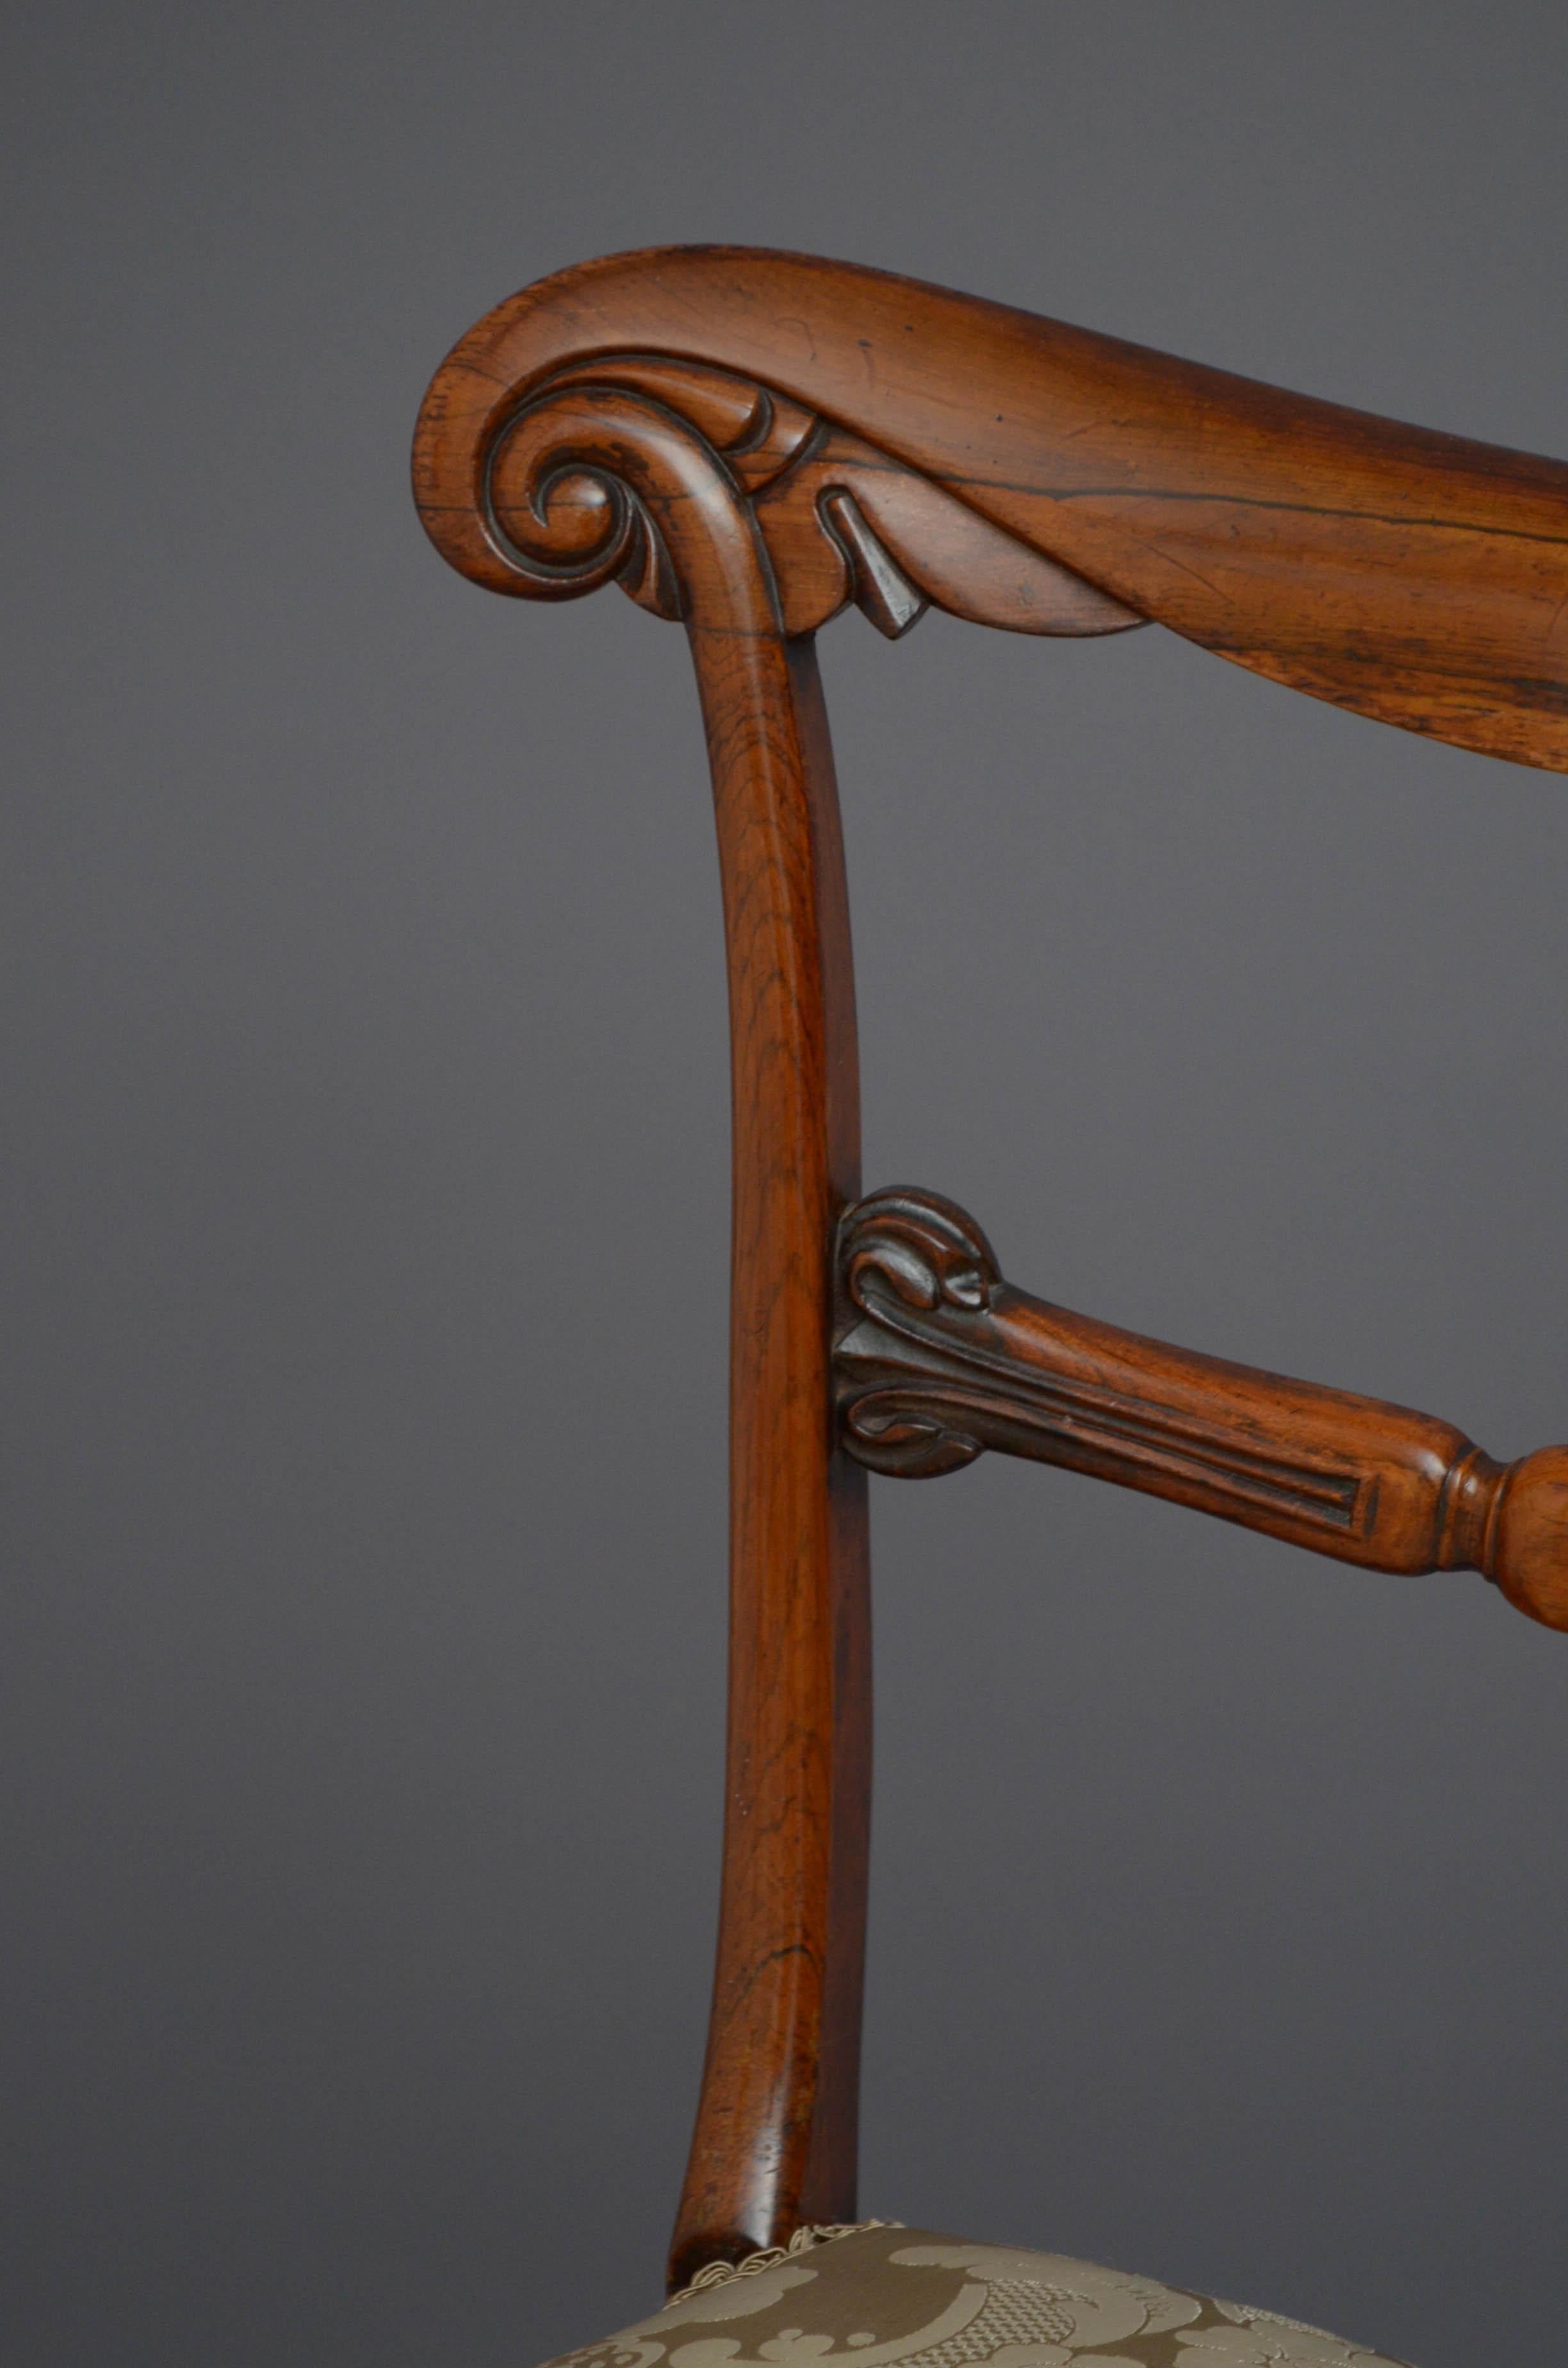 Sn5088 stylish william IV rosewood dressing table or side chair, having shaped and carved top rail above carved mid rails and overstuffed chair with new cover, standing on turned tulip carved legs. This antique chair retains its original finish and